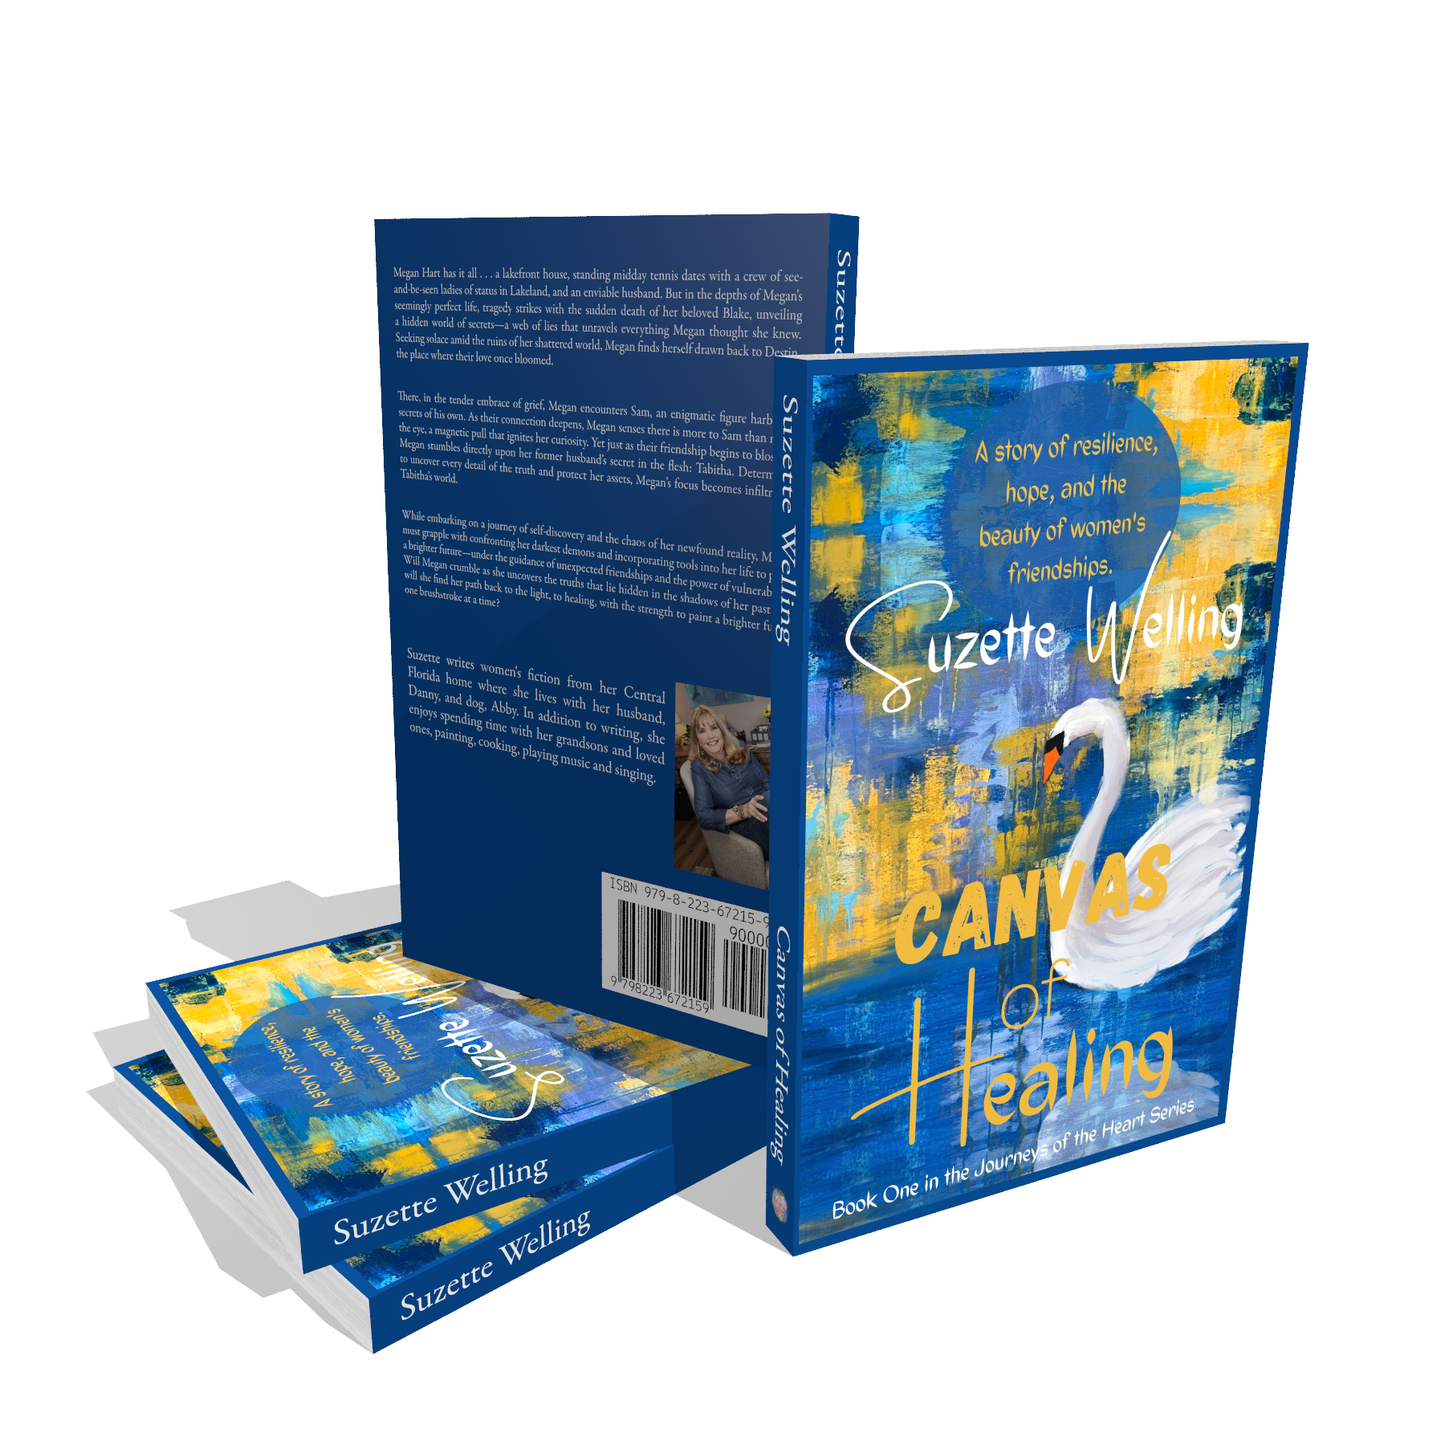 Canvas of Healing, Book #1 in the Journeys of the Heart Series